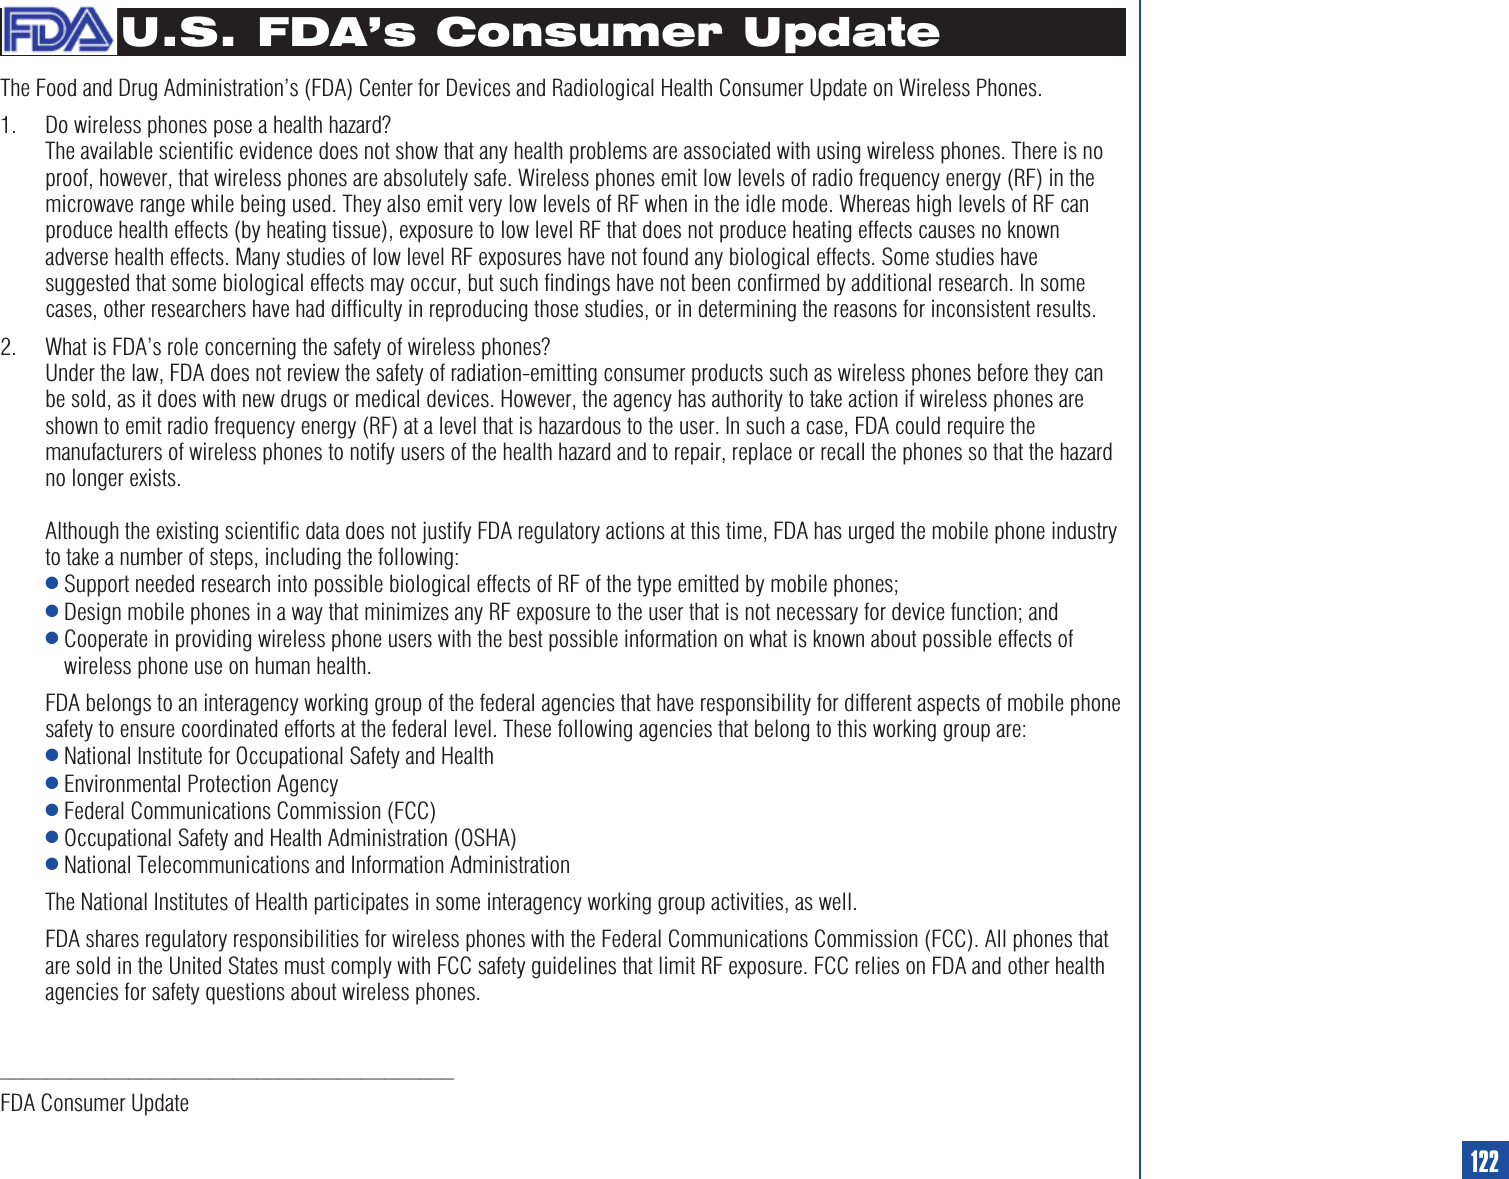 U.S. FDA’s Consumer UpdateThe Food and Drug Administration’s (FDA) Center for Devices and Radiological Health Consumer Update on Wireless Phones.1. Do wireless phones pose a health hazard?The available scientific evidence does not show that any health problems are associated with using wireless phones. There is noproof, however, that wireless phones are absolutely safe. Wireless phones emit low levels of radio frequency energy (RF) in themicrowave range while being used. They also emit very low levels of RF when in the idle mode. Whereas high levels of RF canproduce health effects (by heating tissue), exposure to low level RF that does not produce heating effects causes no knownadverse health effects. Many studies of low level RF exposures have not found any biological effects. Some studies havesuggested that some biological effects may occur, but such findings have not been confirmed by additional research. In somecases, other researchers have had difficulty in reproducing those studies, or in determining the reasons for inconsistent results.2. What is FDA’s role concerning the safety of wireless phones?Under the law, FDA does not review the safety of radiation-emitting consumer products such as wireless phones before they canbe sold, as it does with new drugs or medical devices. However, the agency has authority to take action if wireless phones areshown to emit radio frequency energy (RF) at a level that is hazardous to the user. In such a case, FDA could require themanufacturers of wireless phones to notify users of the health hazard and to repair, replace or recall the phones so that the hazardno longer exists.Although the existing scientific data does not justify FDA regulatory actions at this time, FDA has urged the mobile phone industryto take a number of steps, including the following:lSupport needed research into possible biological effects of RF of the type emitted by mobile phones;lDesign mobile phones in a way that minimizes any RF exposure to the user that is not necessary for device function; andlCooperate in providing wireless phone users with the best possible information on what is known about possible effects ofwireless phone use on human health.FDA belongs to an interagency working group of the federal agencies that have responsibility for different aspects of mobile phonesafety to ensure coordinated efforts at the federal level. These following agencies that belong to this working group are:lNational Institute for Occupational Safety and HealthlEnvironmental Protection AgencylFederal Communications Commission (FCC)lOccupational Safety and Health Administration (OSHA)lNational Telecommunications and Information AdministrationThe National Institutes of Health participates in some interagency working group activities, as well.FDA shares regulatory responsibilities for wireless phones with the Federal Communications Commission (FCC). All phones thatare sold in the United States must comply with FCC safety guidelines that limit RF exposure. FCC relies on FDA and other healthagencies for safety questions about wireless phones._______________________________________FDA Consumer Update122